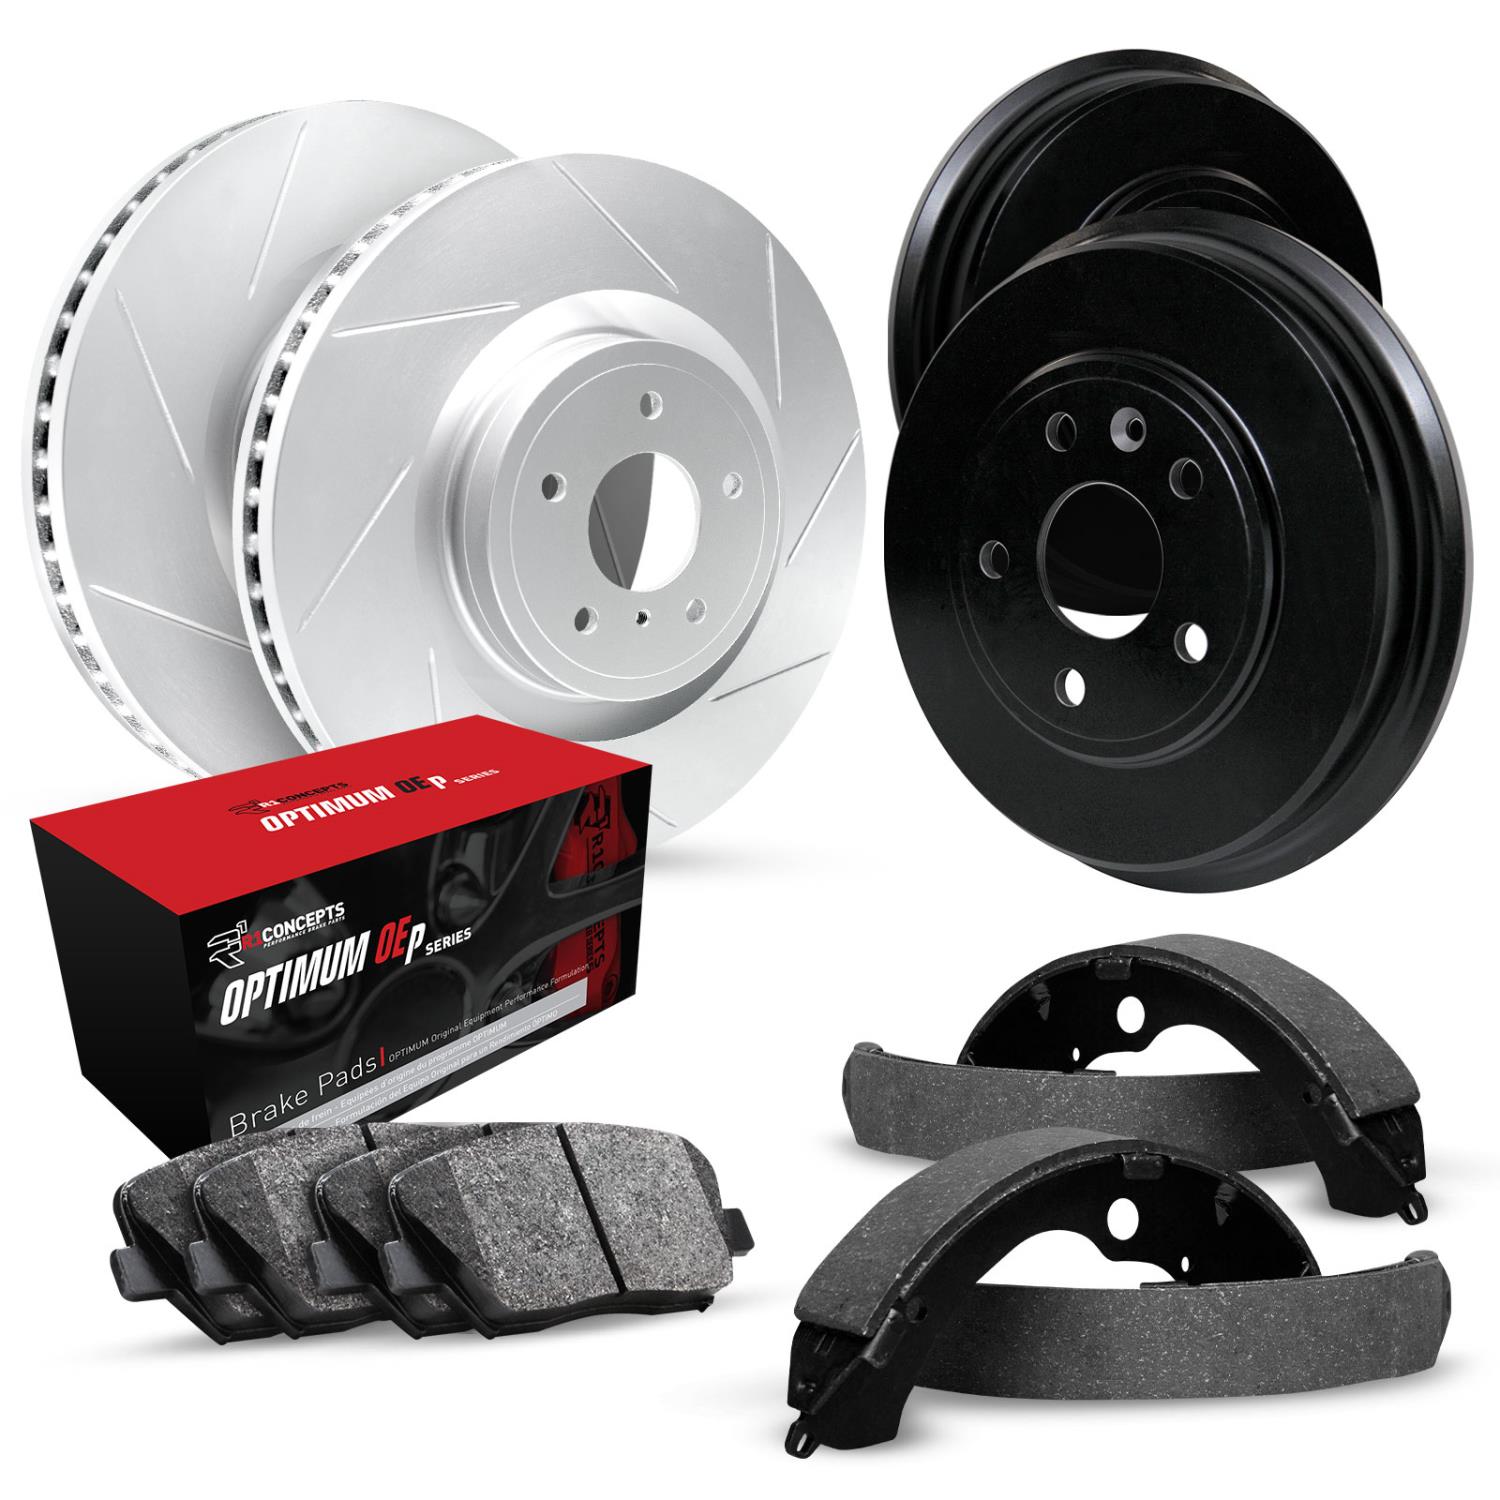 GEO-Carbon Slotted Brake Rotor & Drum Set w/Optimum OE Pads & Shoes, 1990-1991 Infiniti/Nissan, Position: Front & Rear